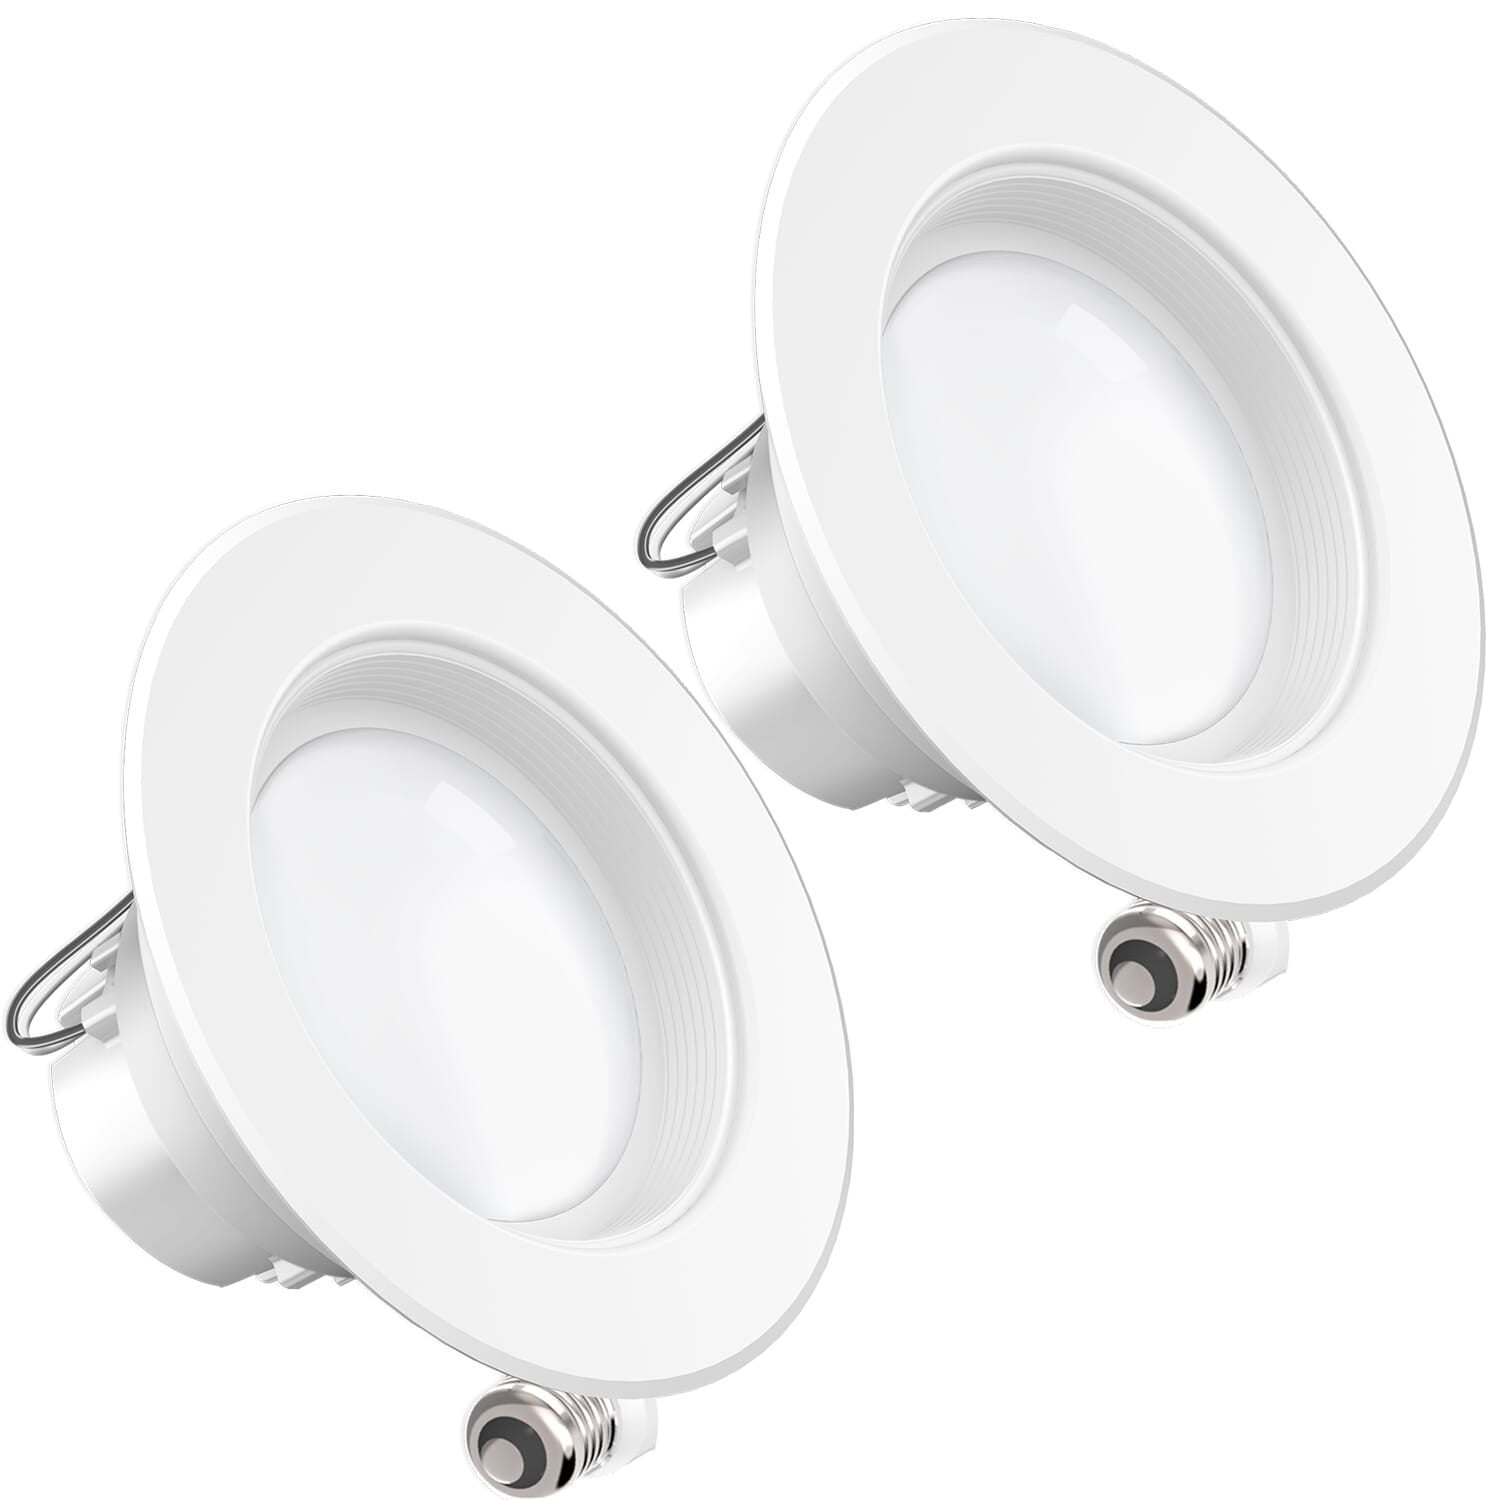 Energy Star Baffle Trim 660 LM Dimmable UL Damp Rated Sunco Lighting 4 Inch LED Recessed Downlight 4000K Cool White Simple Retrofit Installation 11W=40W